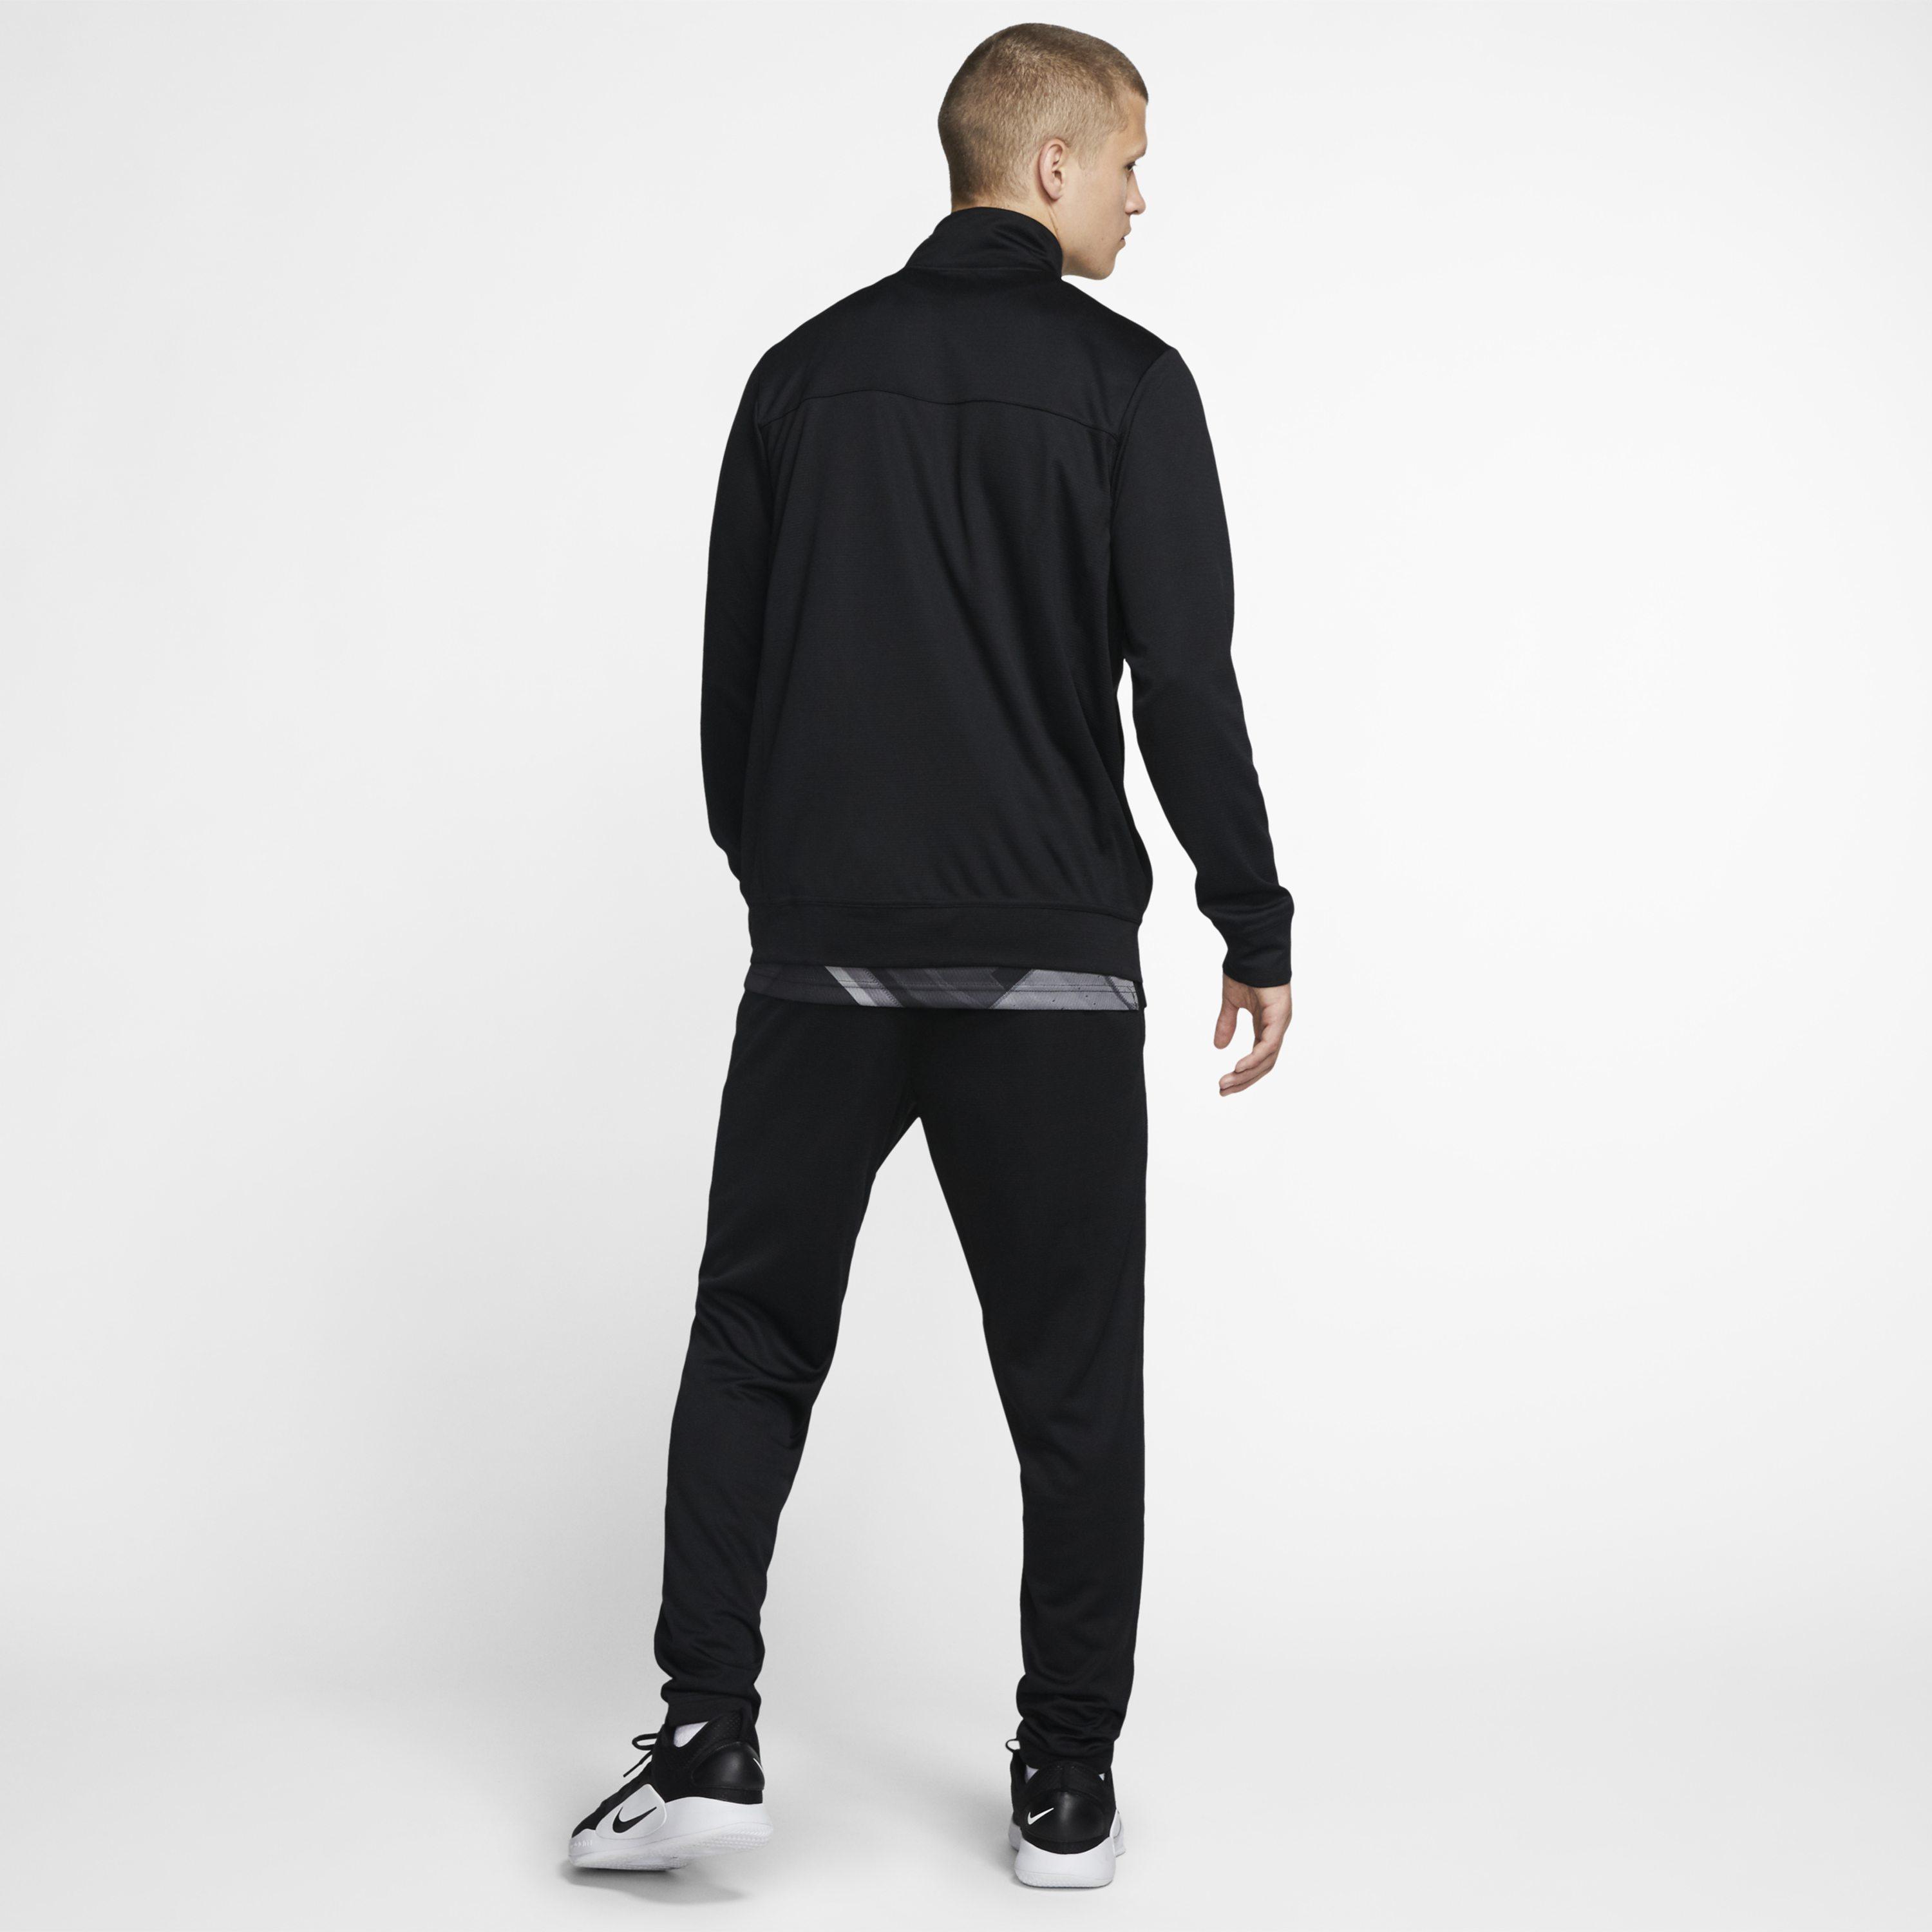 Nike Rivalry Basketball Tracksuit in Black for Men - Lyst